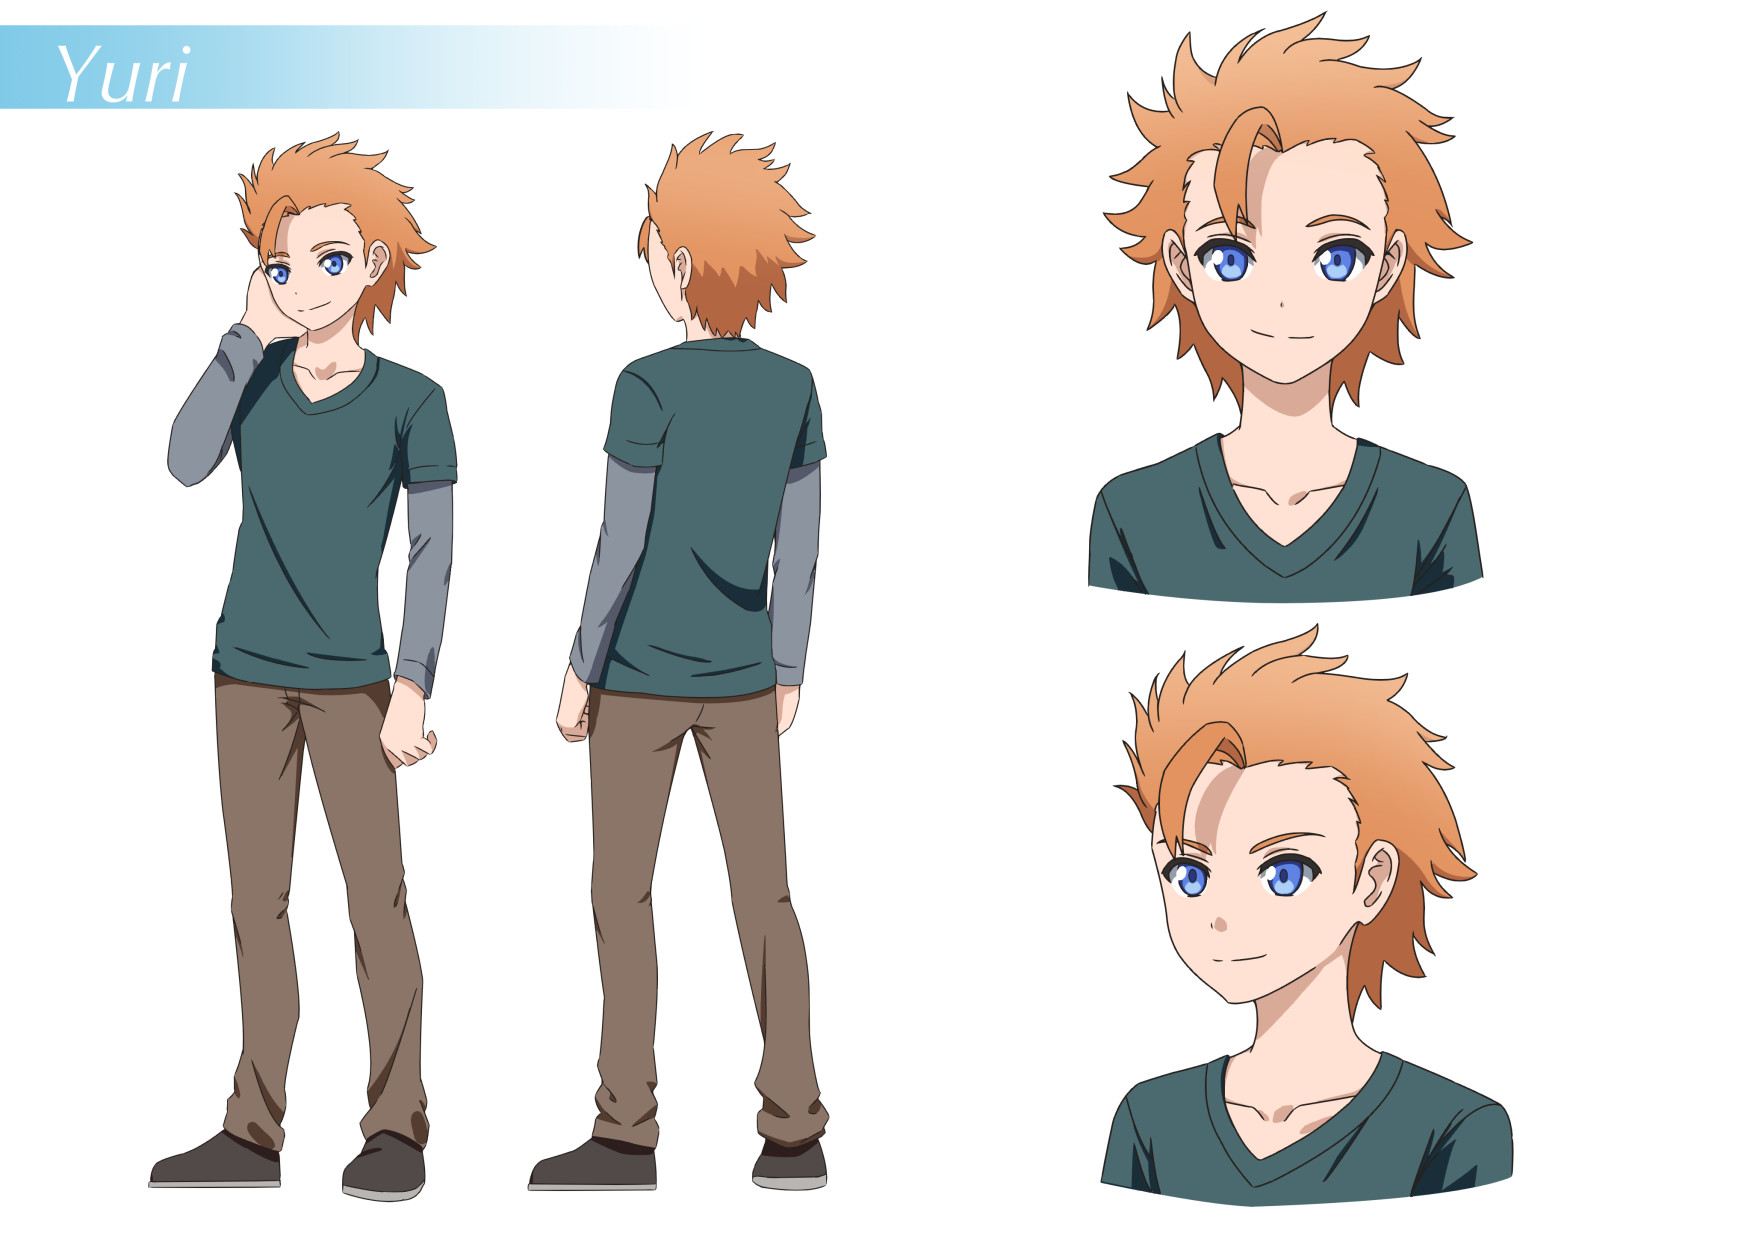 Character Sheet Anime style  ArtistsClients